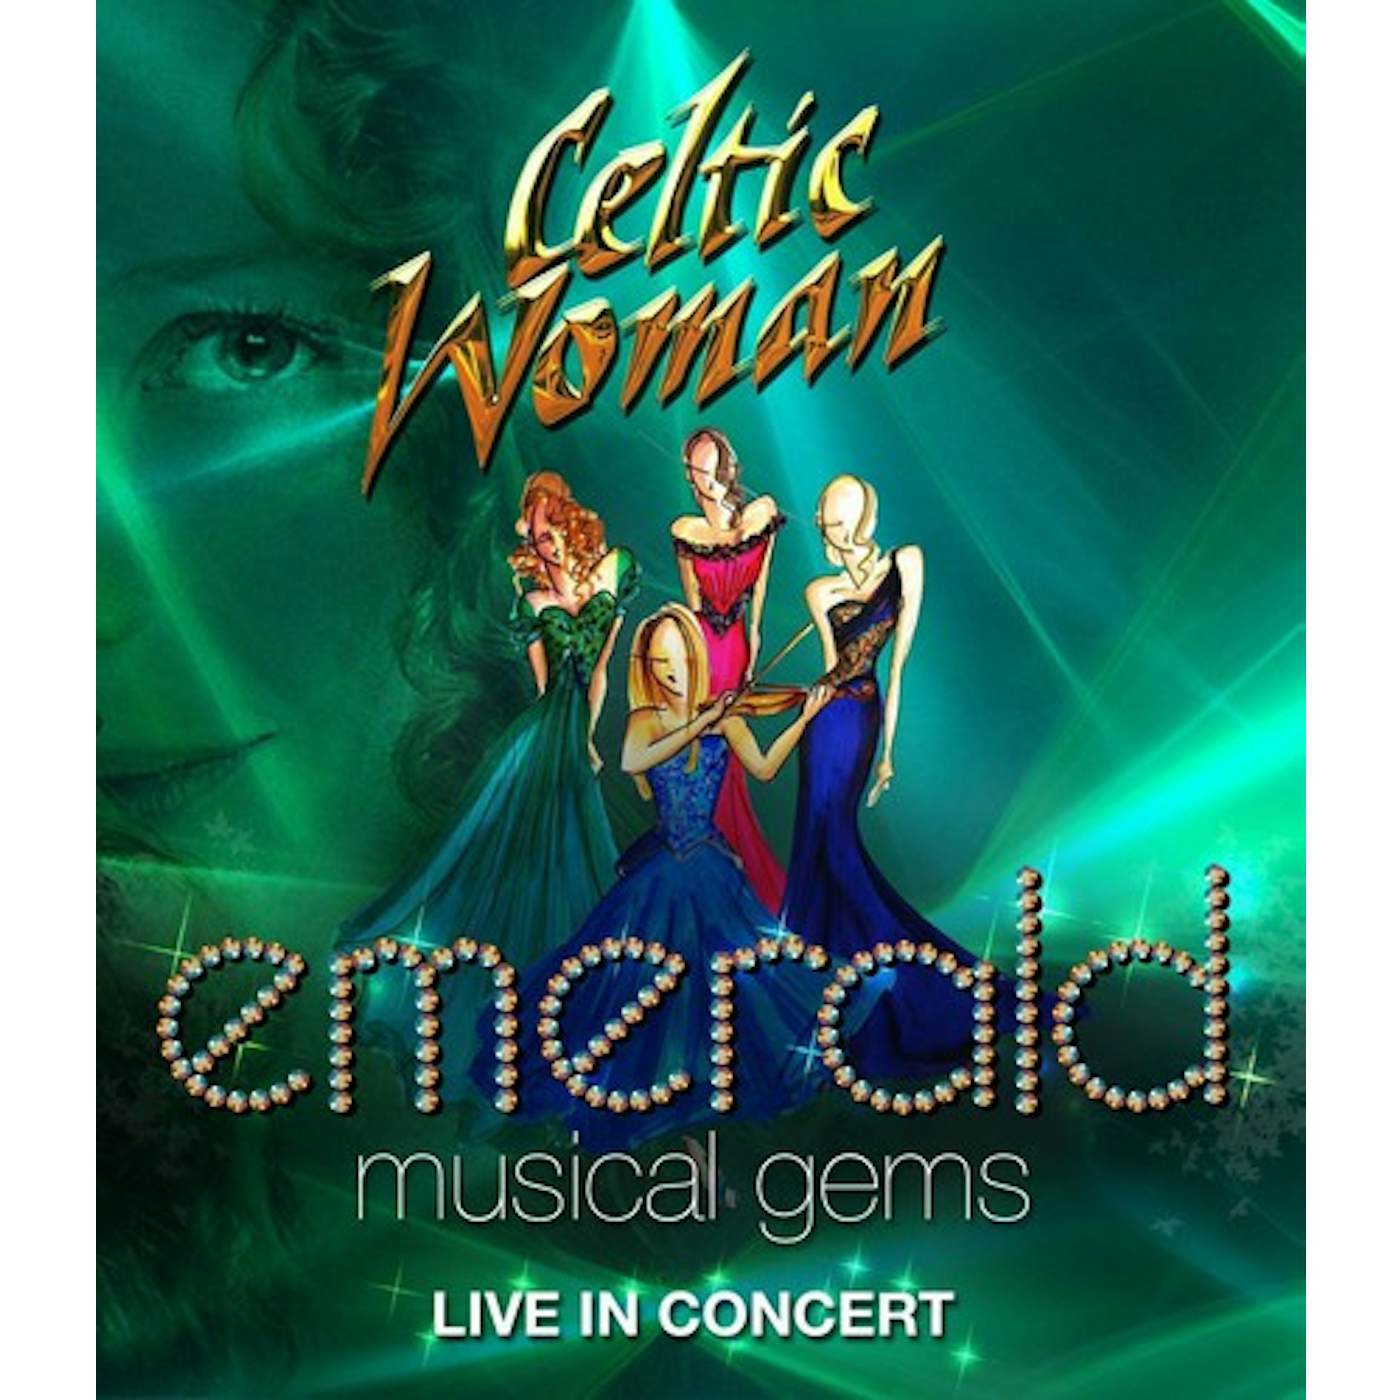 Celtic Woman EMERALD: MUSICAL GEMS - LIVE IN CONCERT DVD